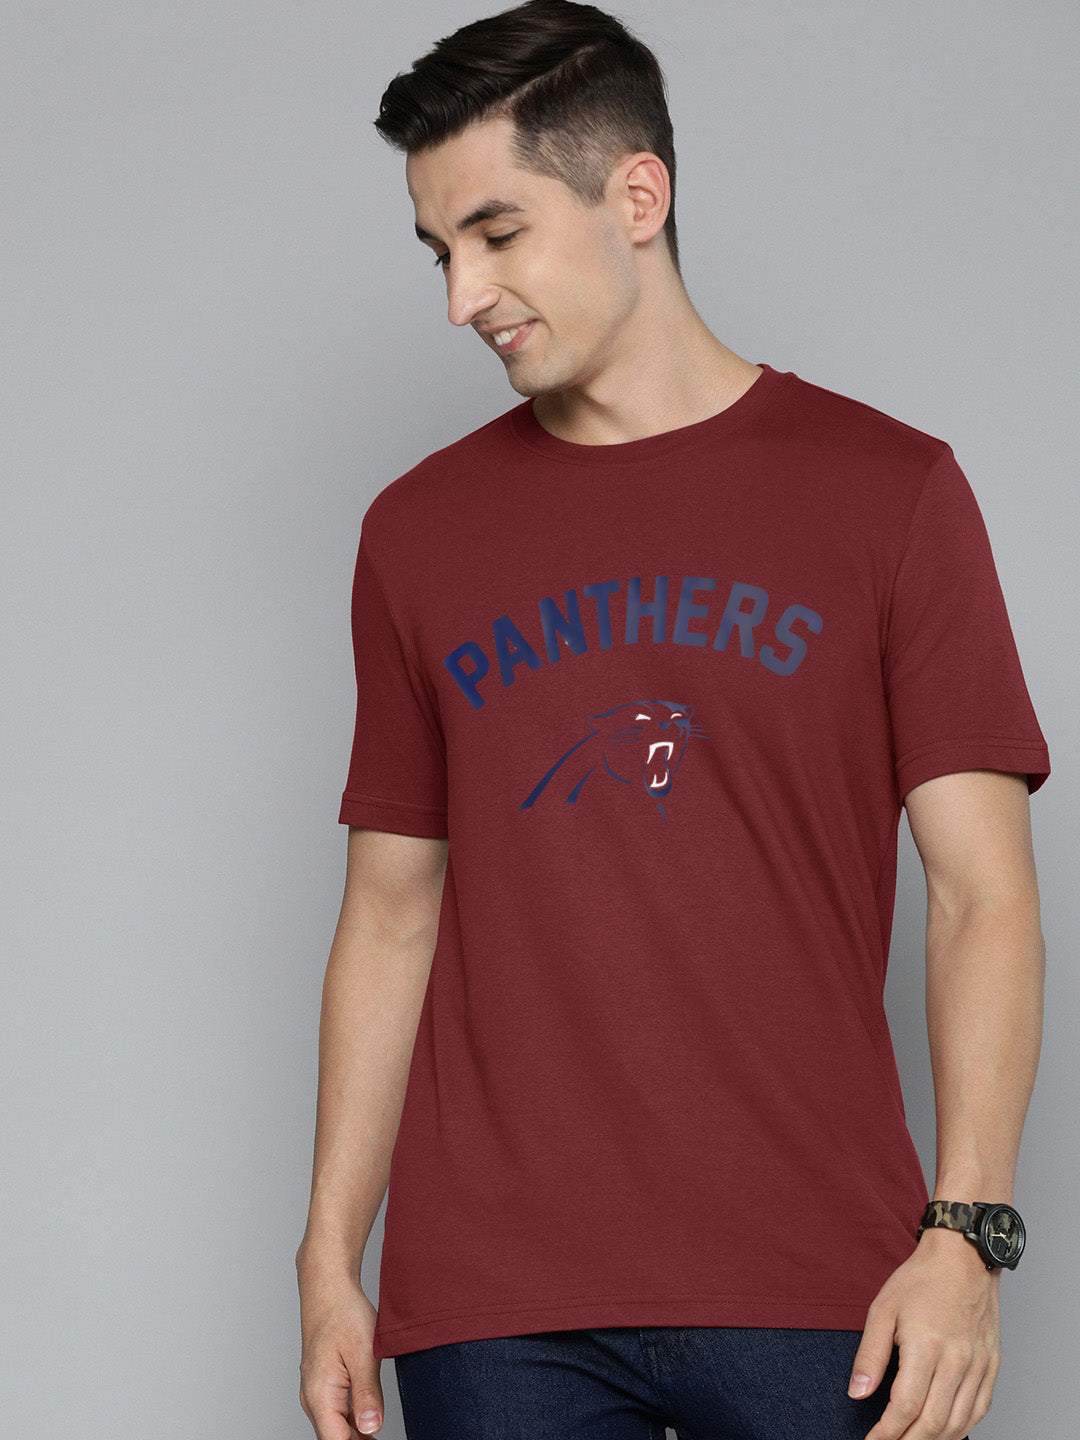 47 Single Jersey Crew Neck Tee Shirt For Men-Maroon with Print-SP1657